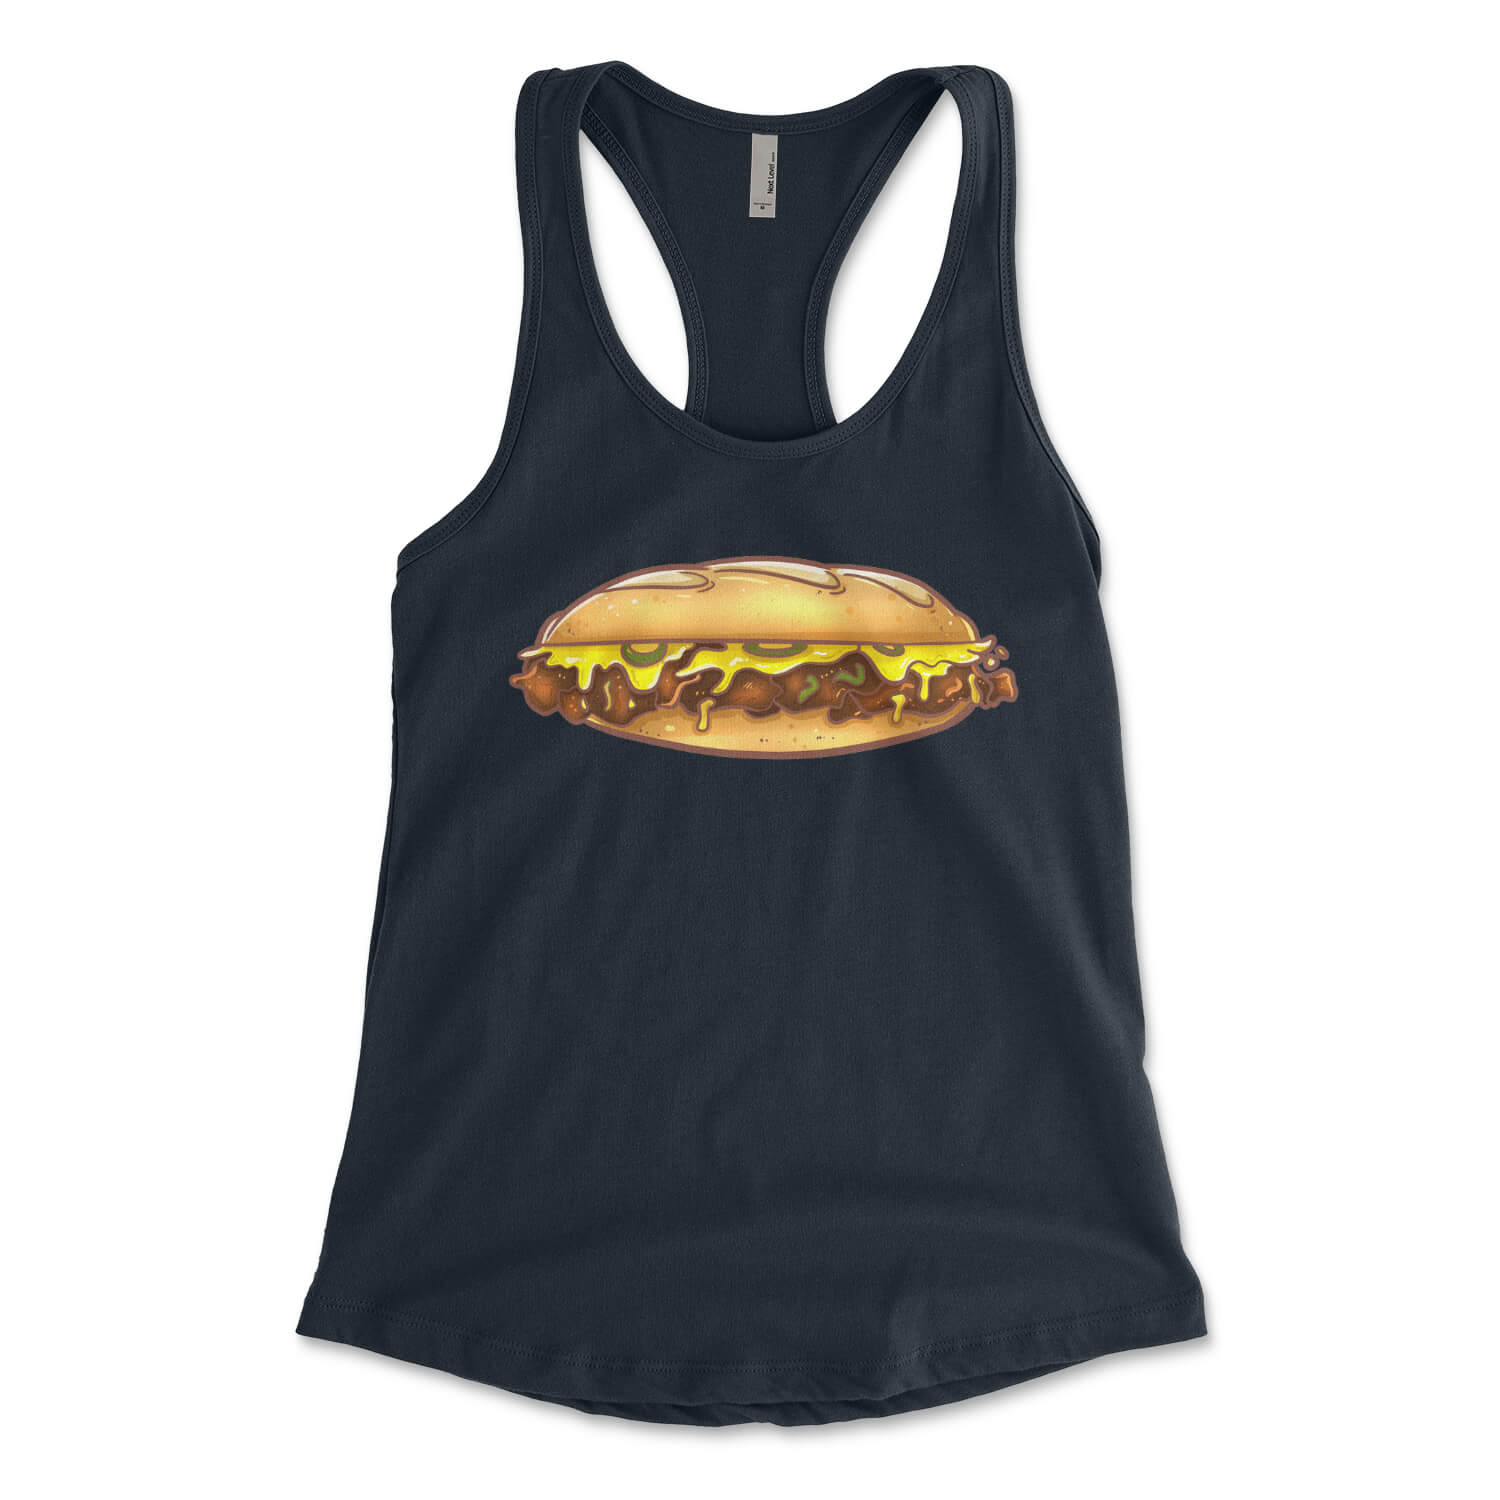 Philly cheesesteak midnight navy blue womens racerback tank top from Phillygoat